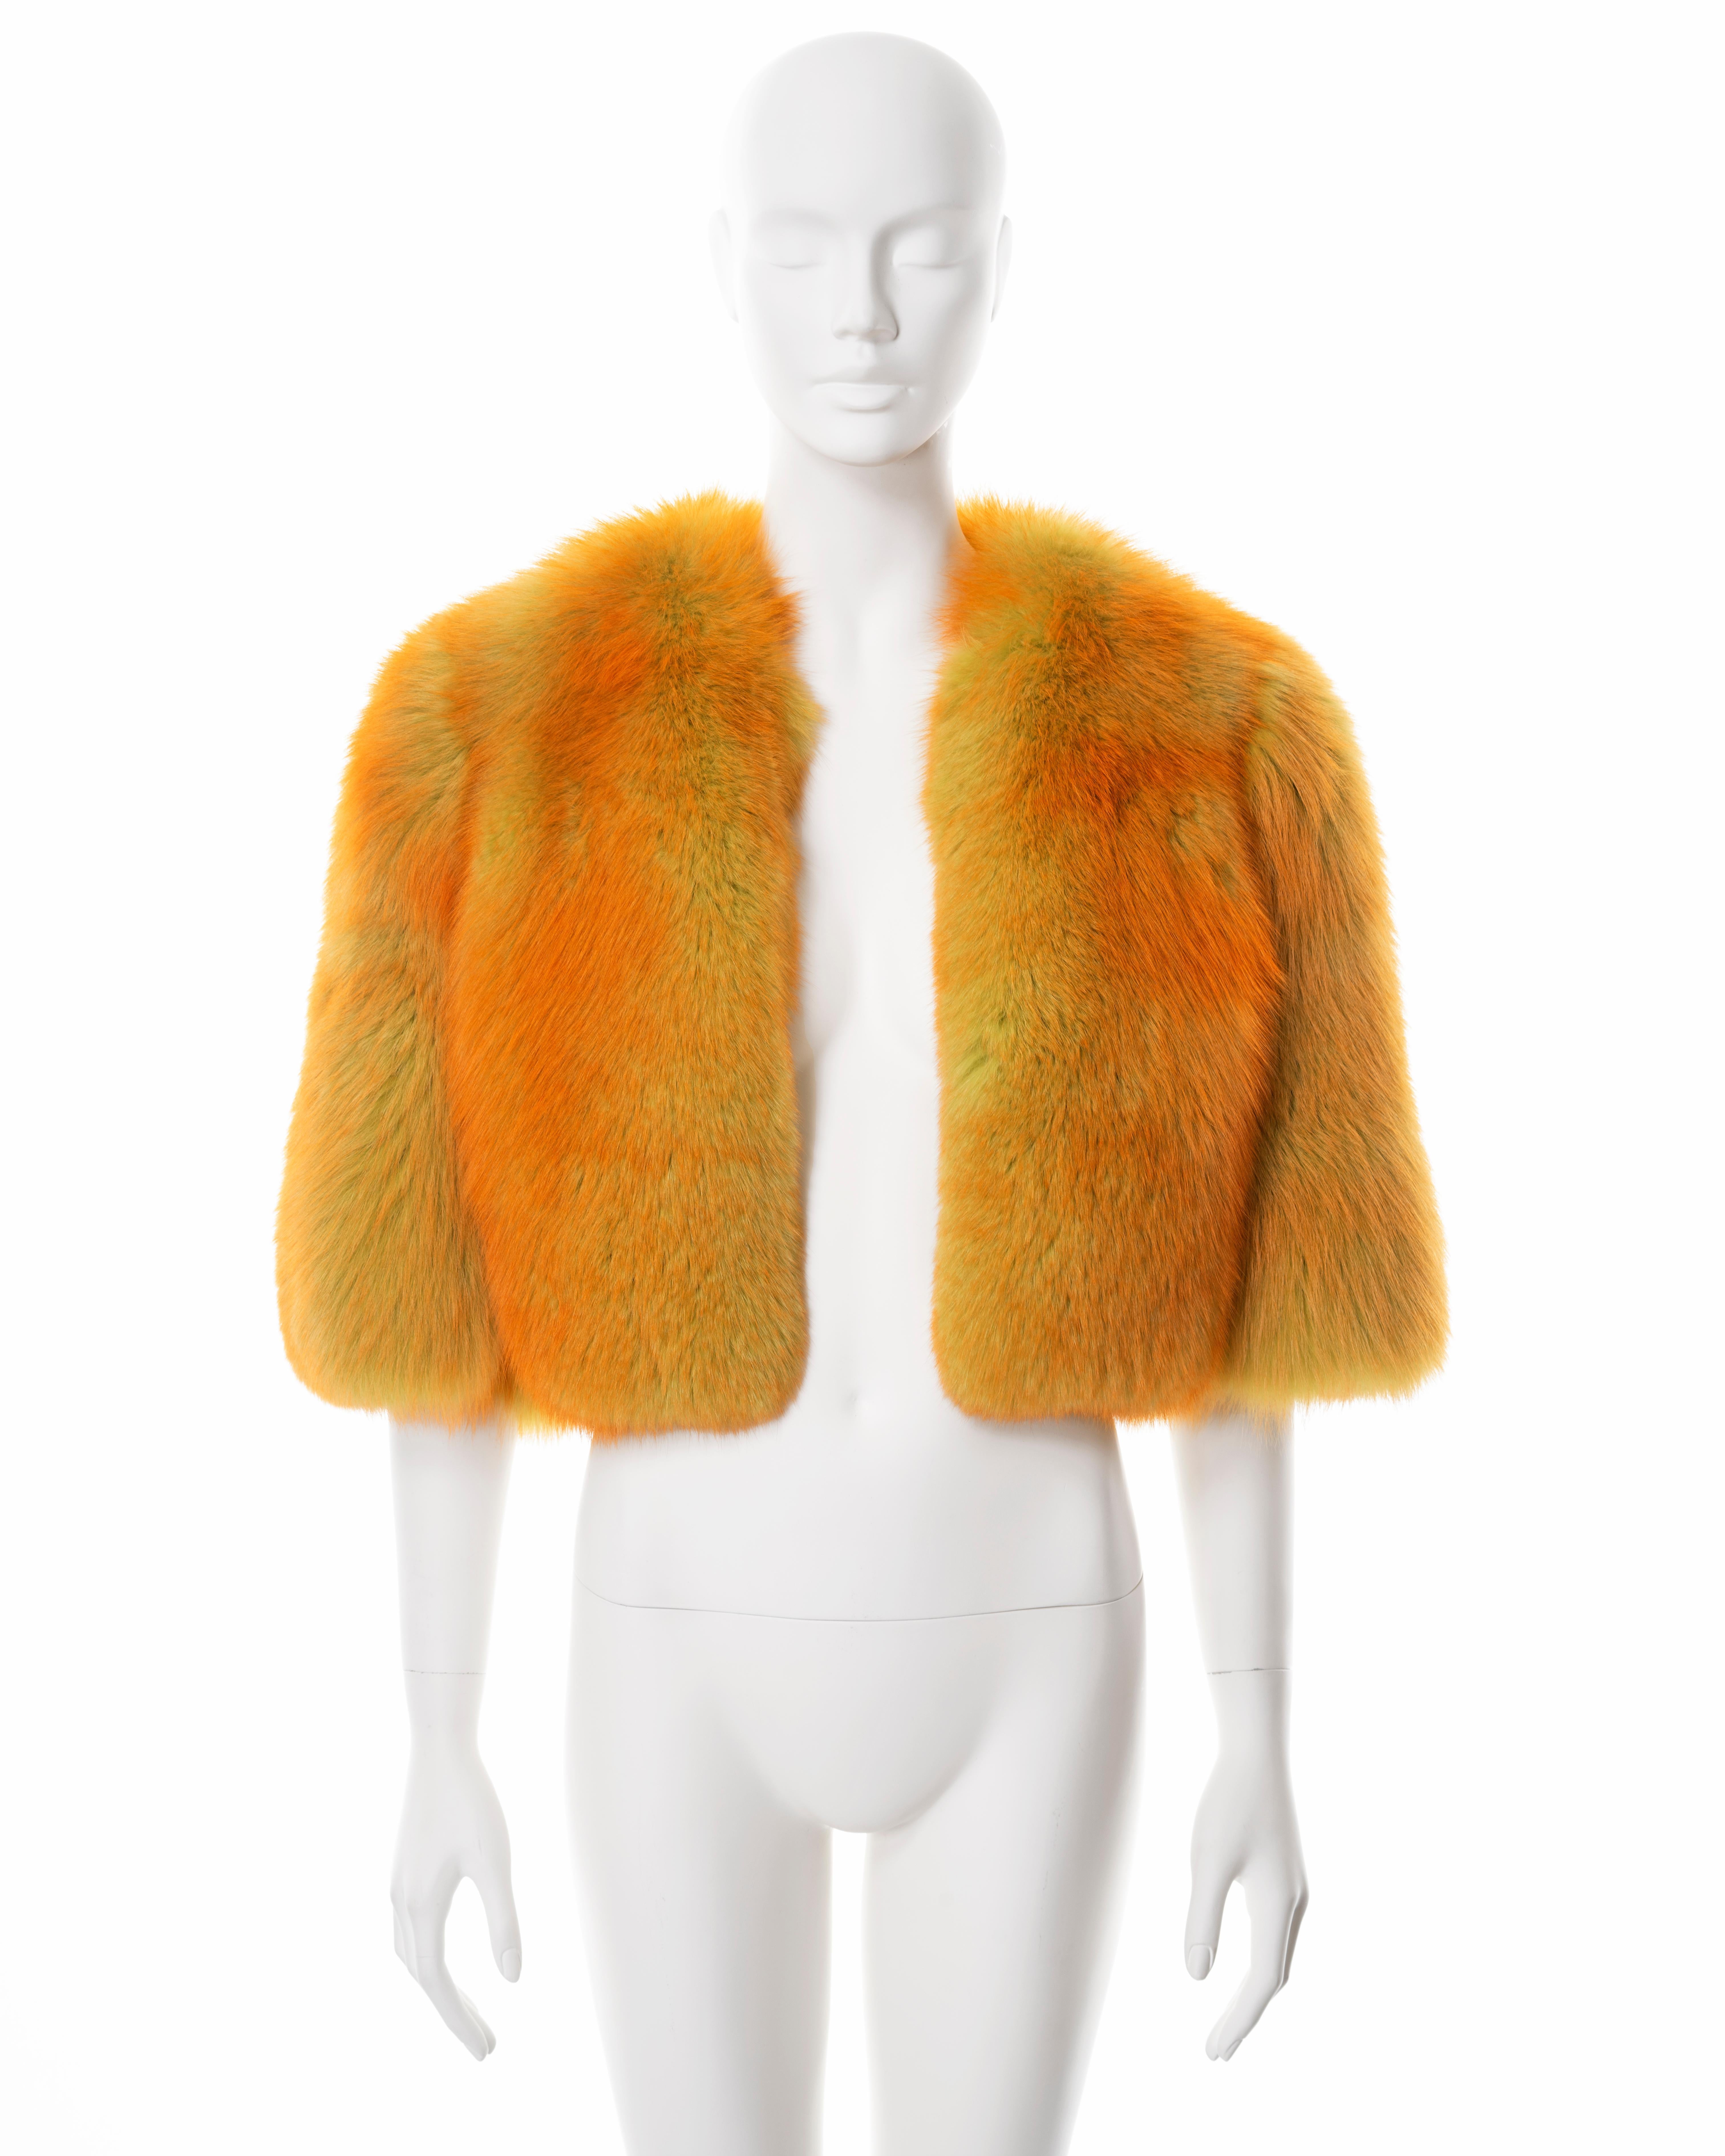 ▪ Dolce & Gabbana fur jacket
▪ Sold by One of a Kind Archive
▪ Constructed from orange dyed fox fur with lime undertones  
▪ Cropped length and sleeves 
▪ Silk leopard print lining 
▪ Front hook closure 
▪ IT 42 - FR 38 - UK 10 - US 6
▪ Made in